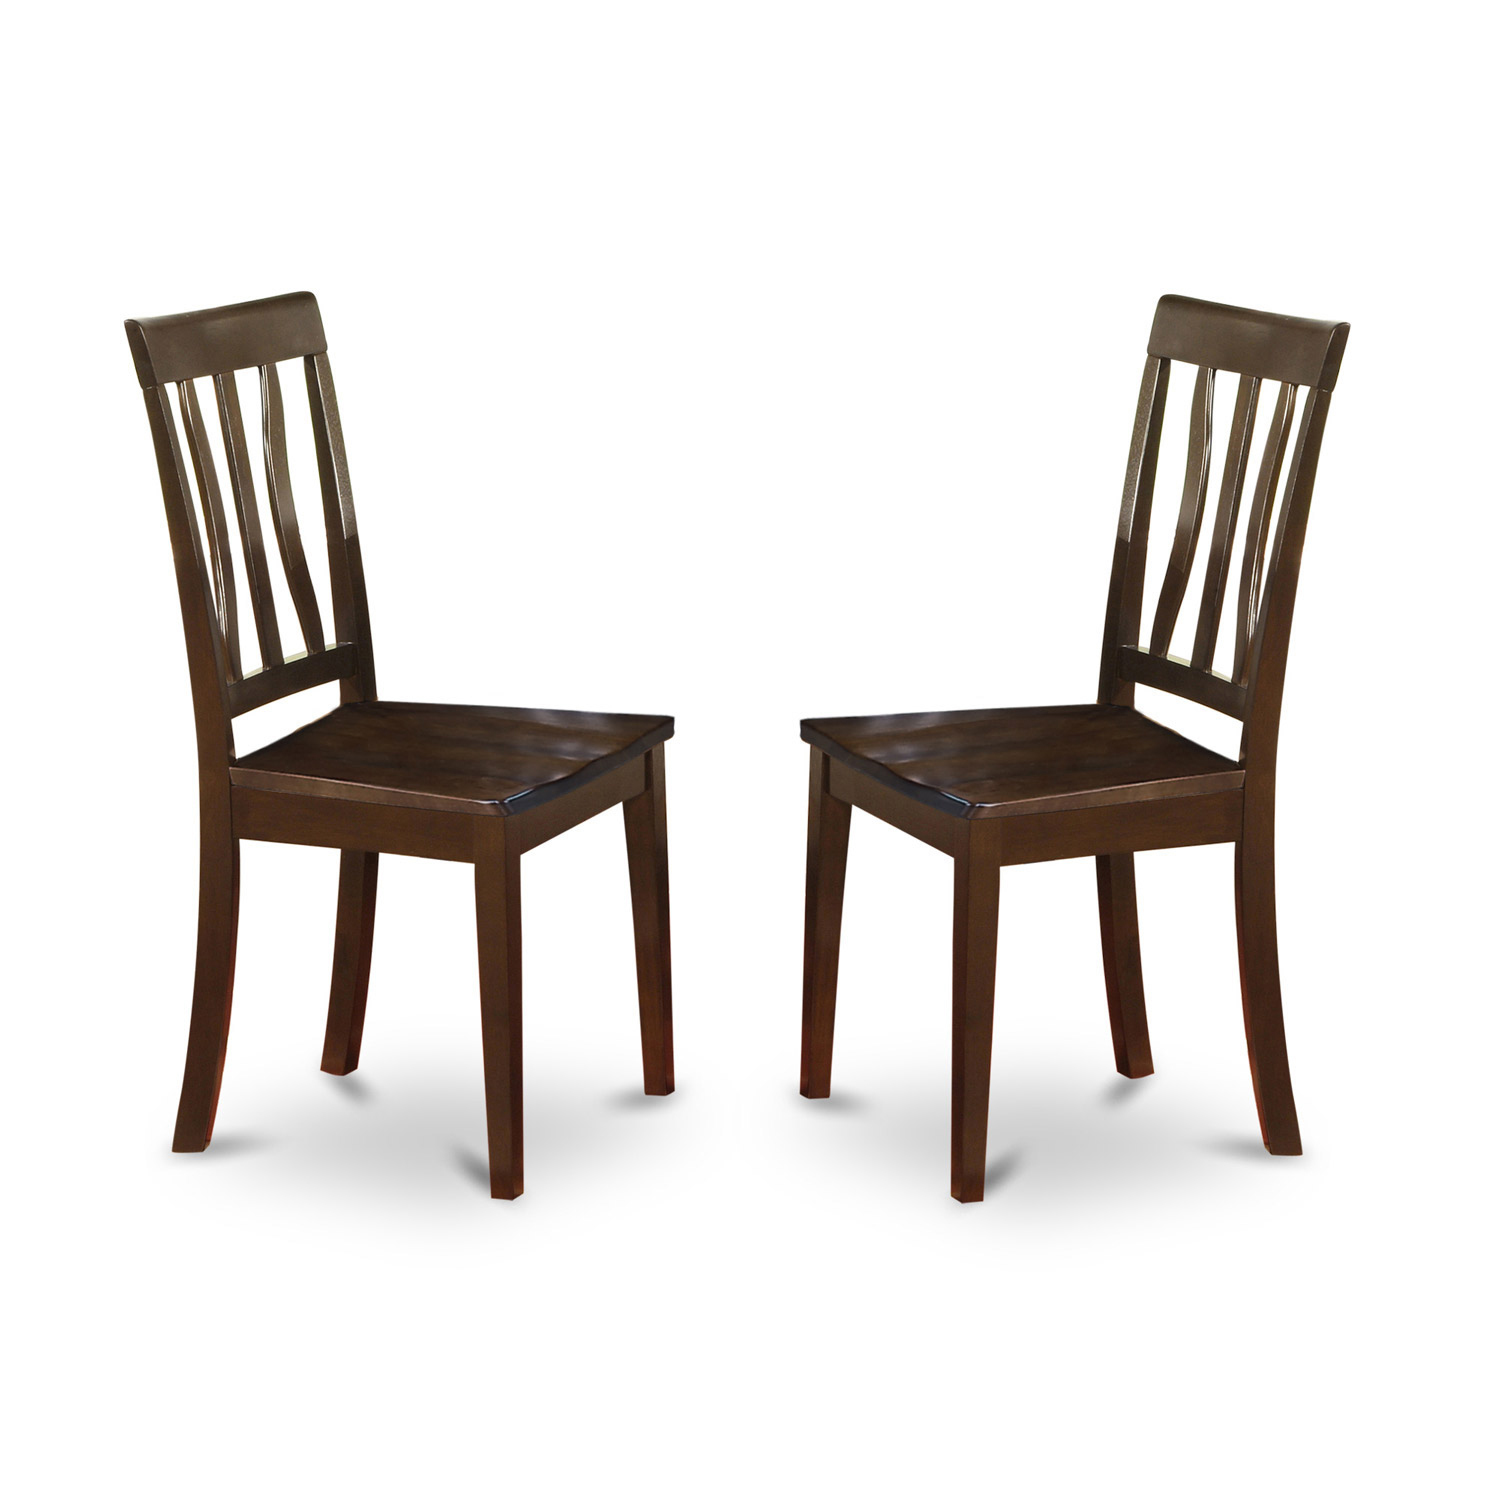 5 Pc Kitchen Table set- Table and 4 dinette Chairs. - image 3 of 5